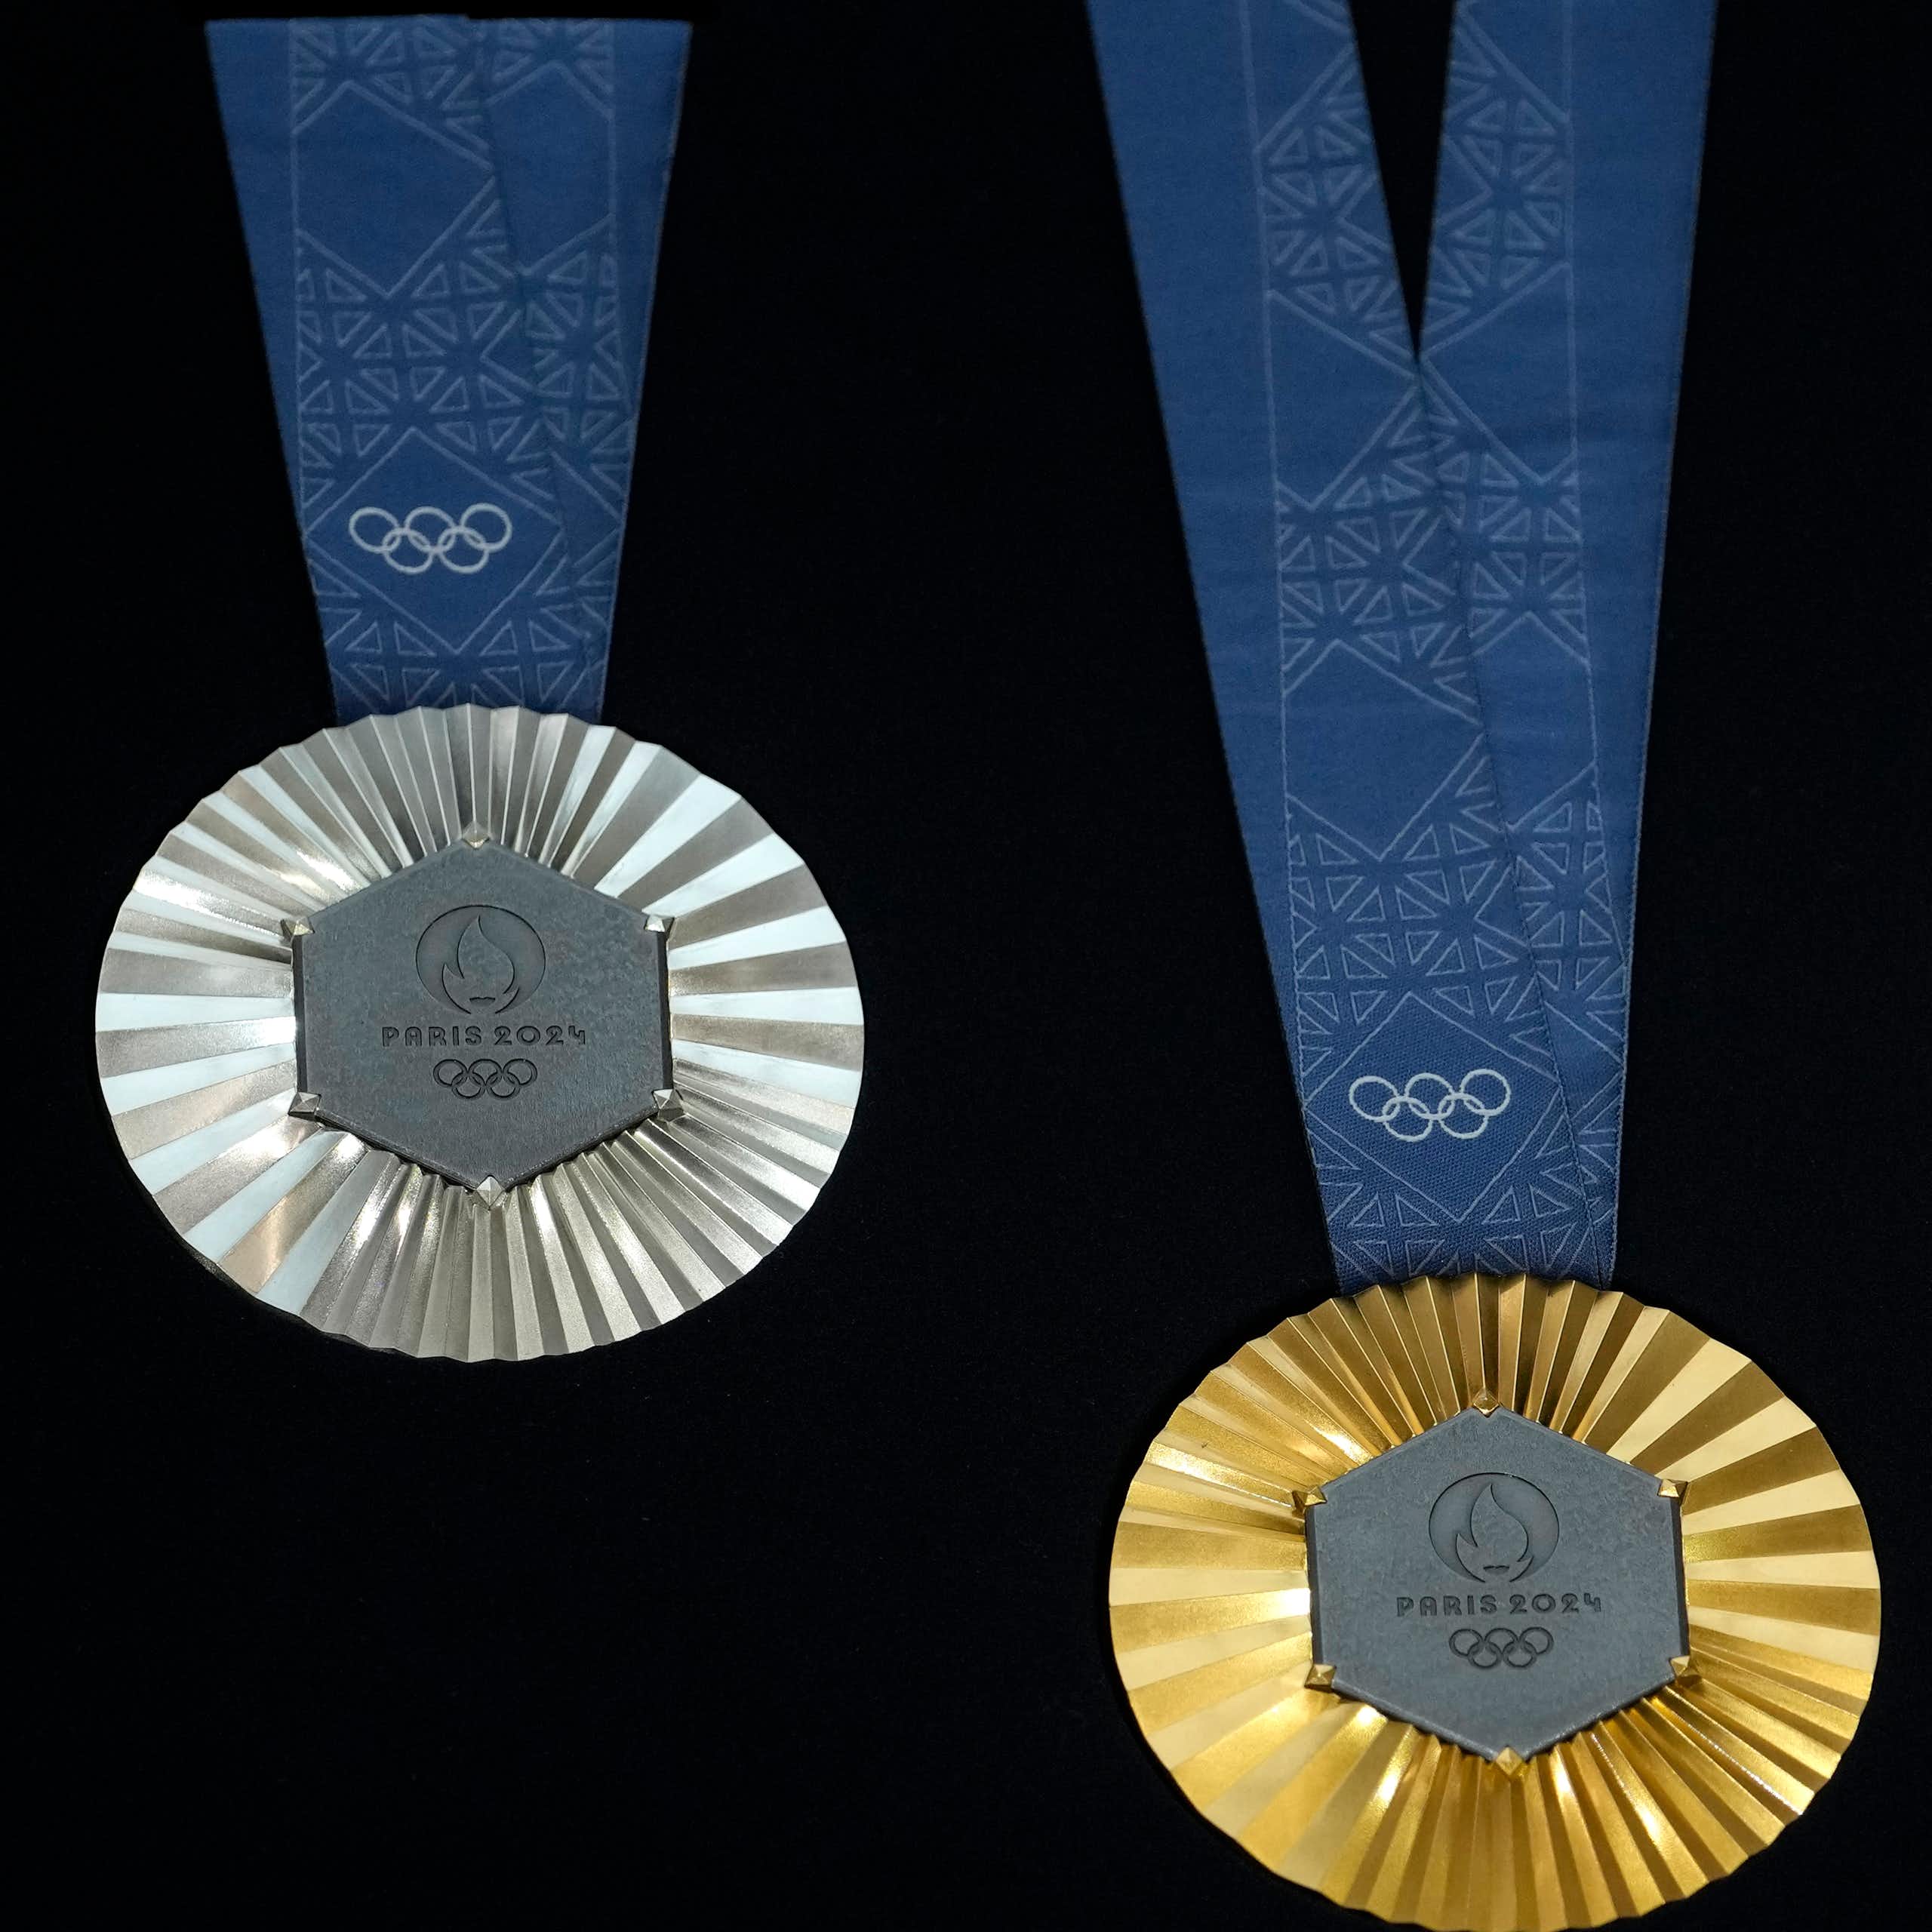 The Paris 2024 Olympic medals are showcased